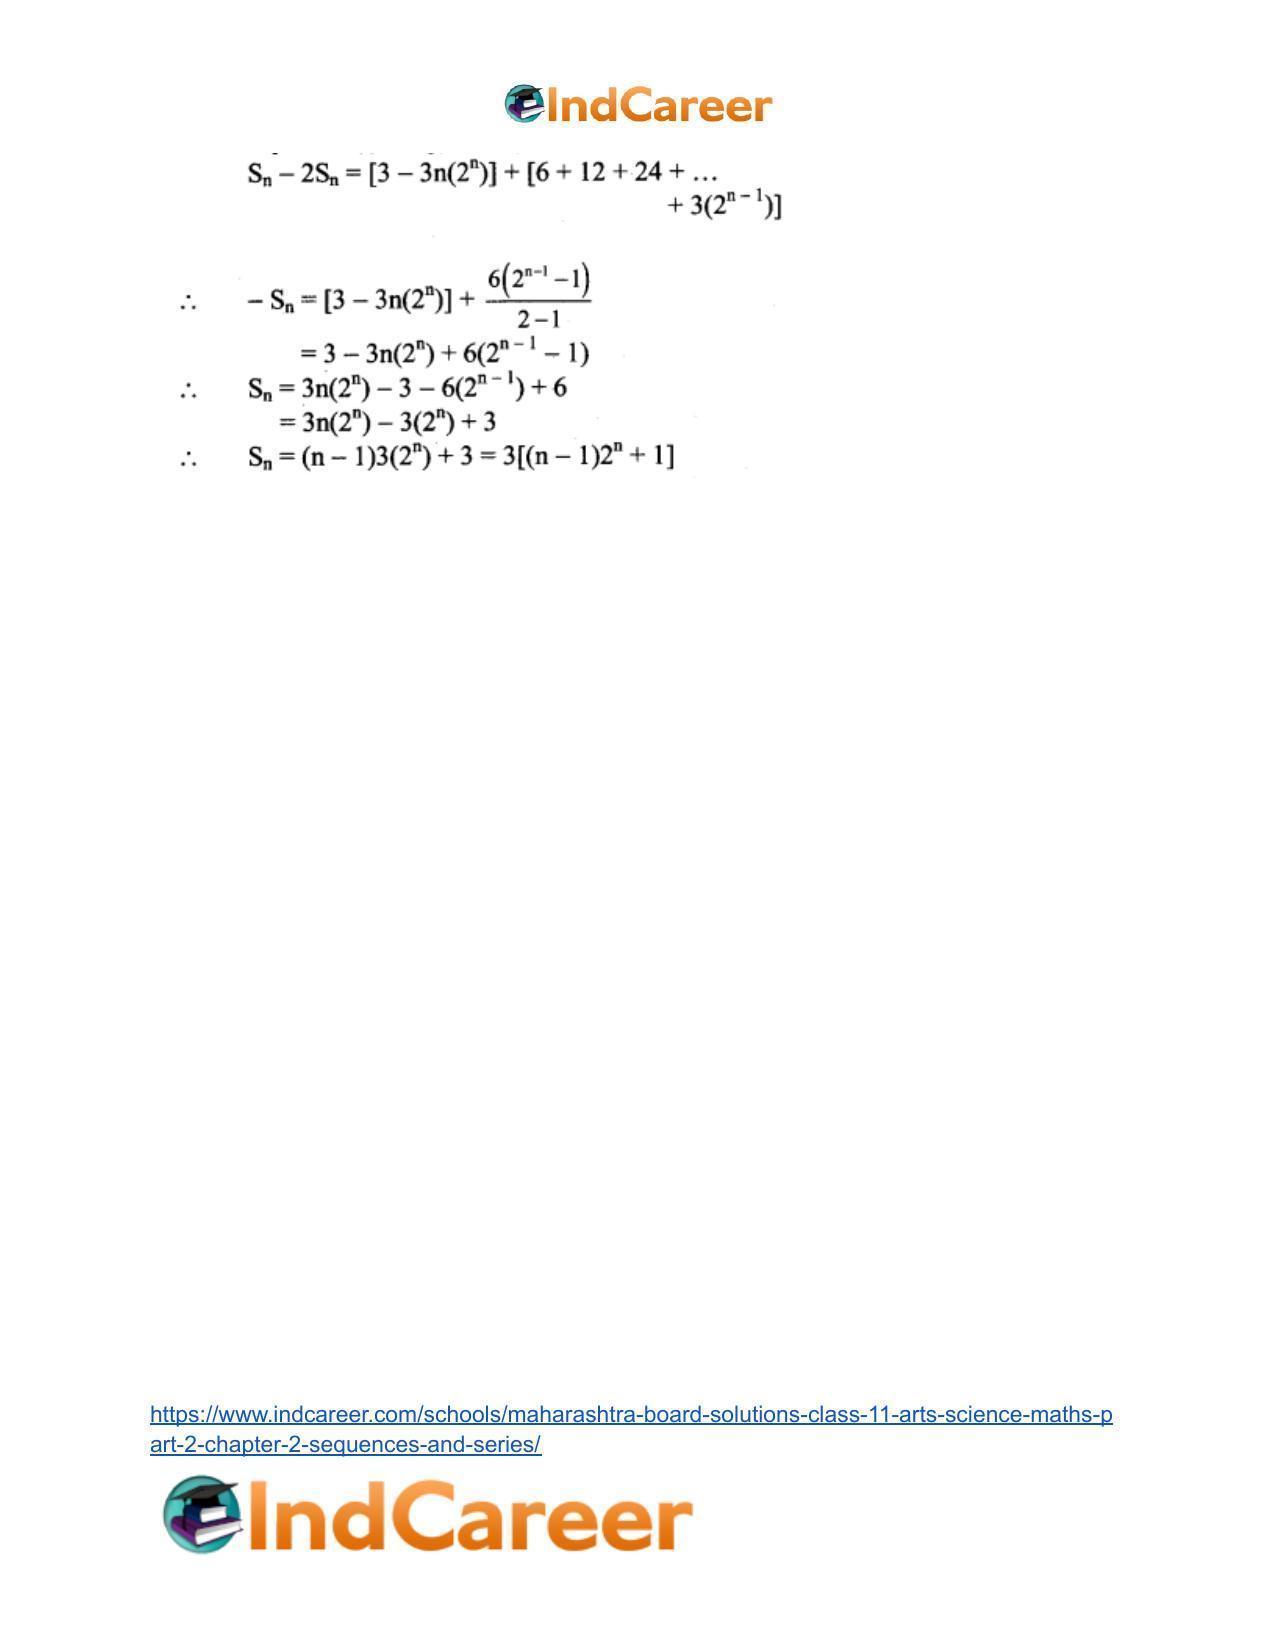 Maharashtra Board Solutions Class 11-Arts & Science Maths (Part 2): Chapter 2- Sequences and Series - Page 64